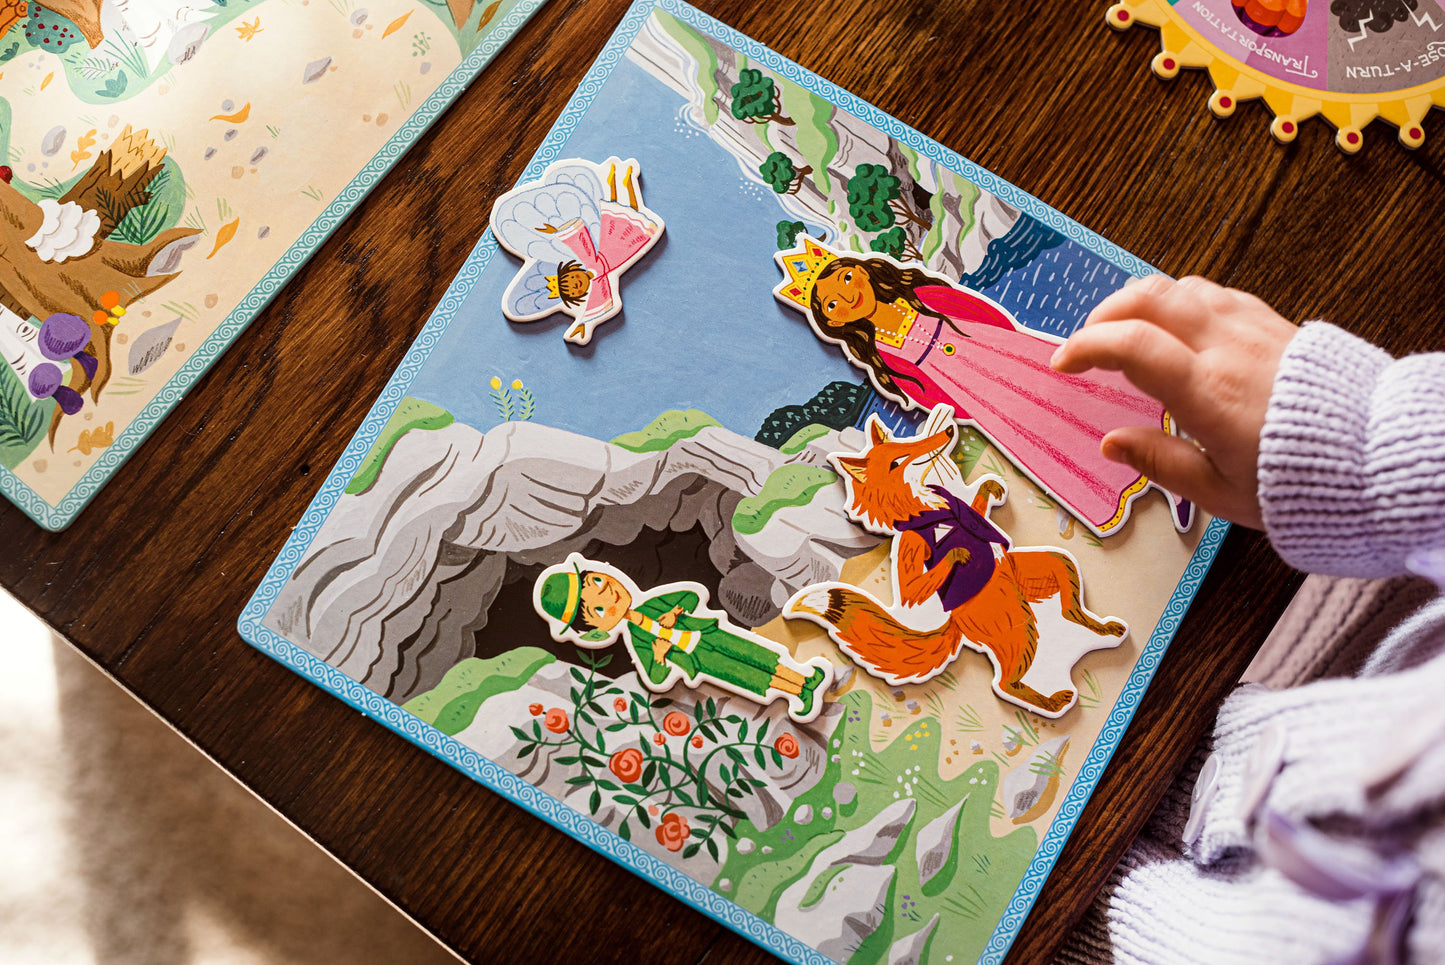 Fairytale Create A Story Spinner Award Winning Game by eeBoo | Unique Gifts for Pre School Kids 3+